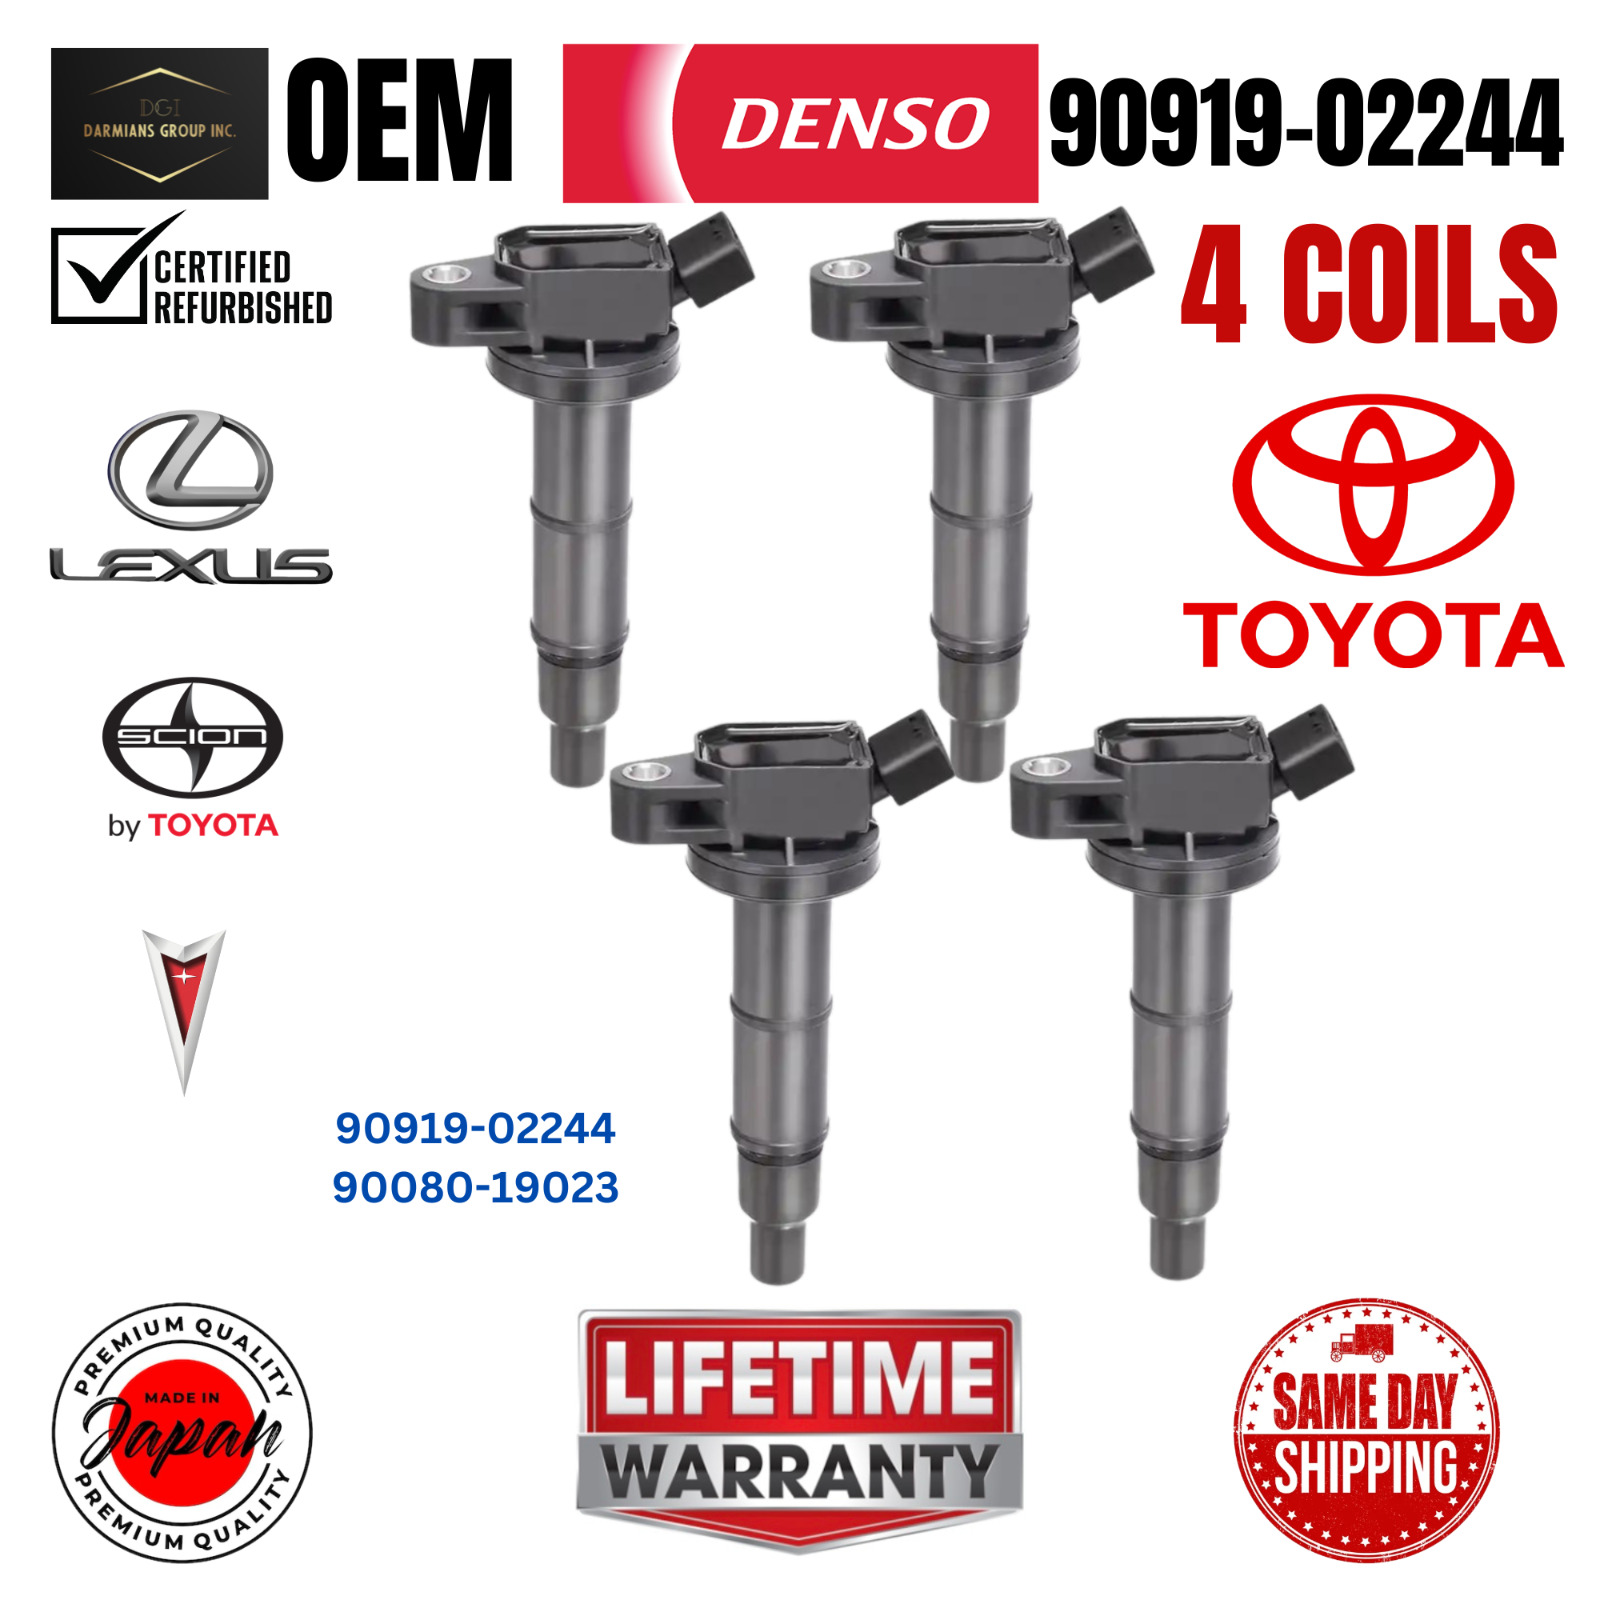 OEM DENSO x4 Ignition Coil For Toyota Lexus Scion RAV4 Camry Corolla 90919-02244